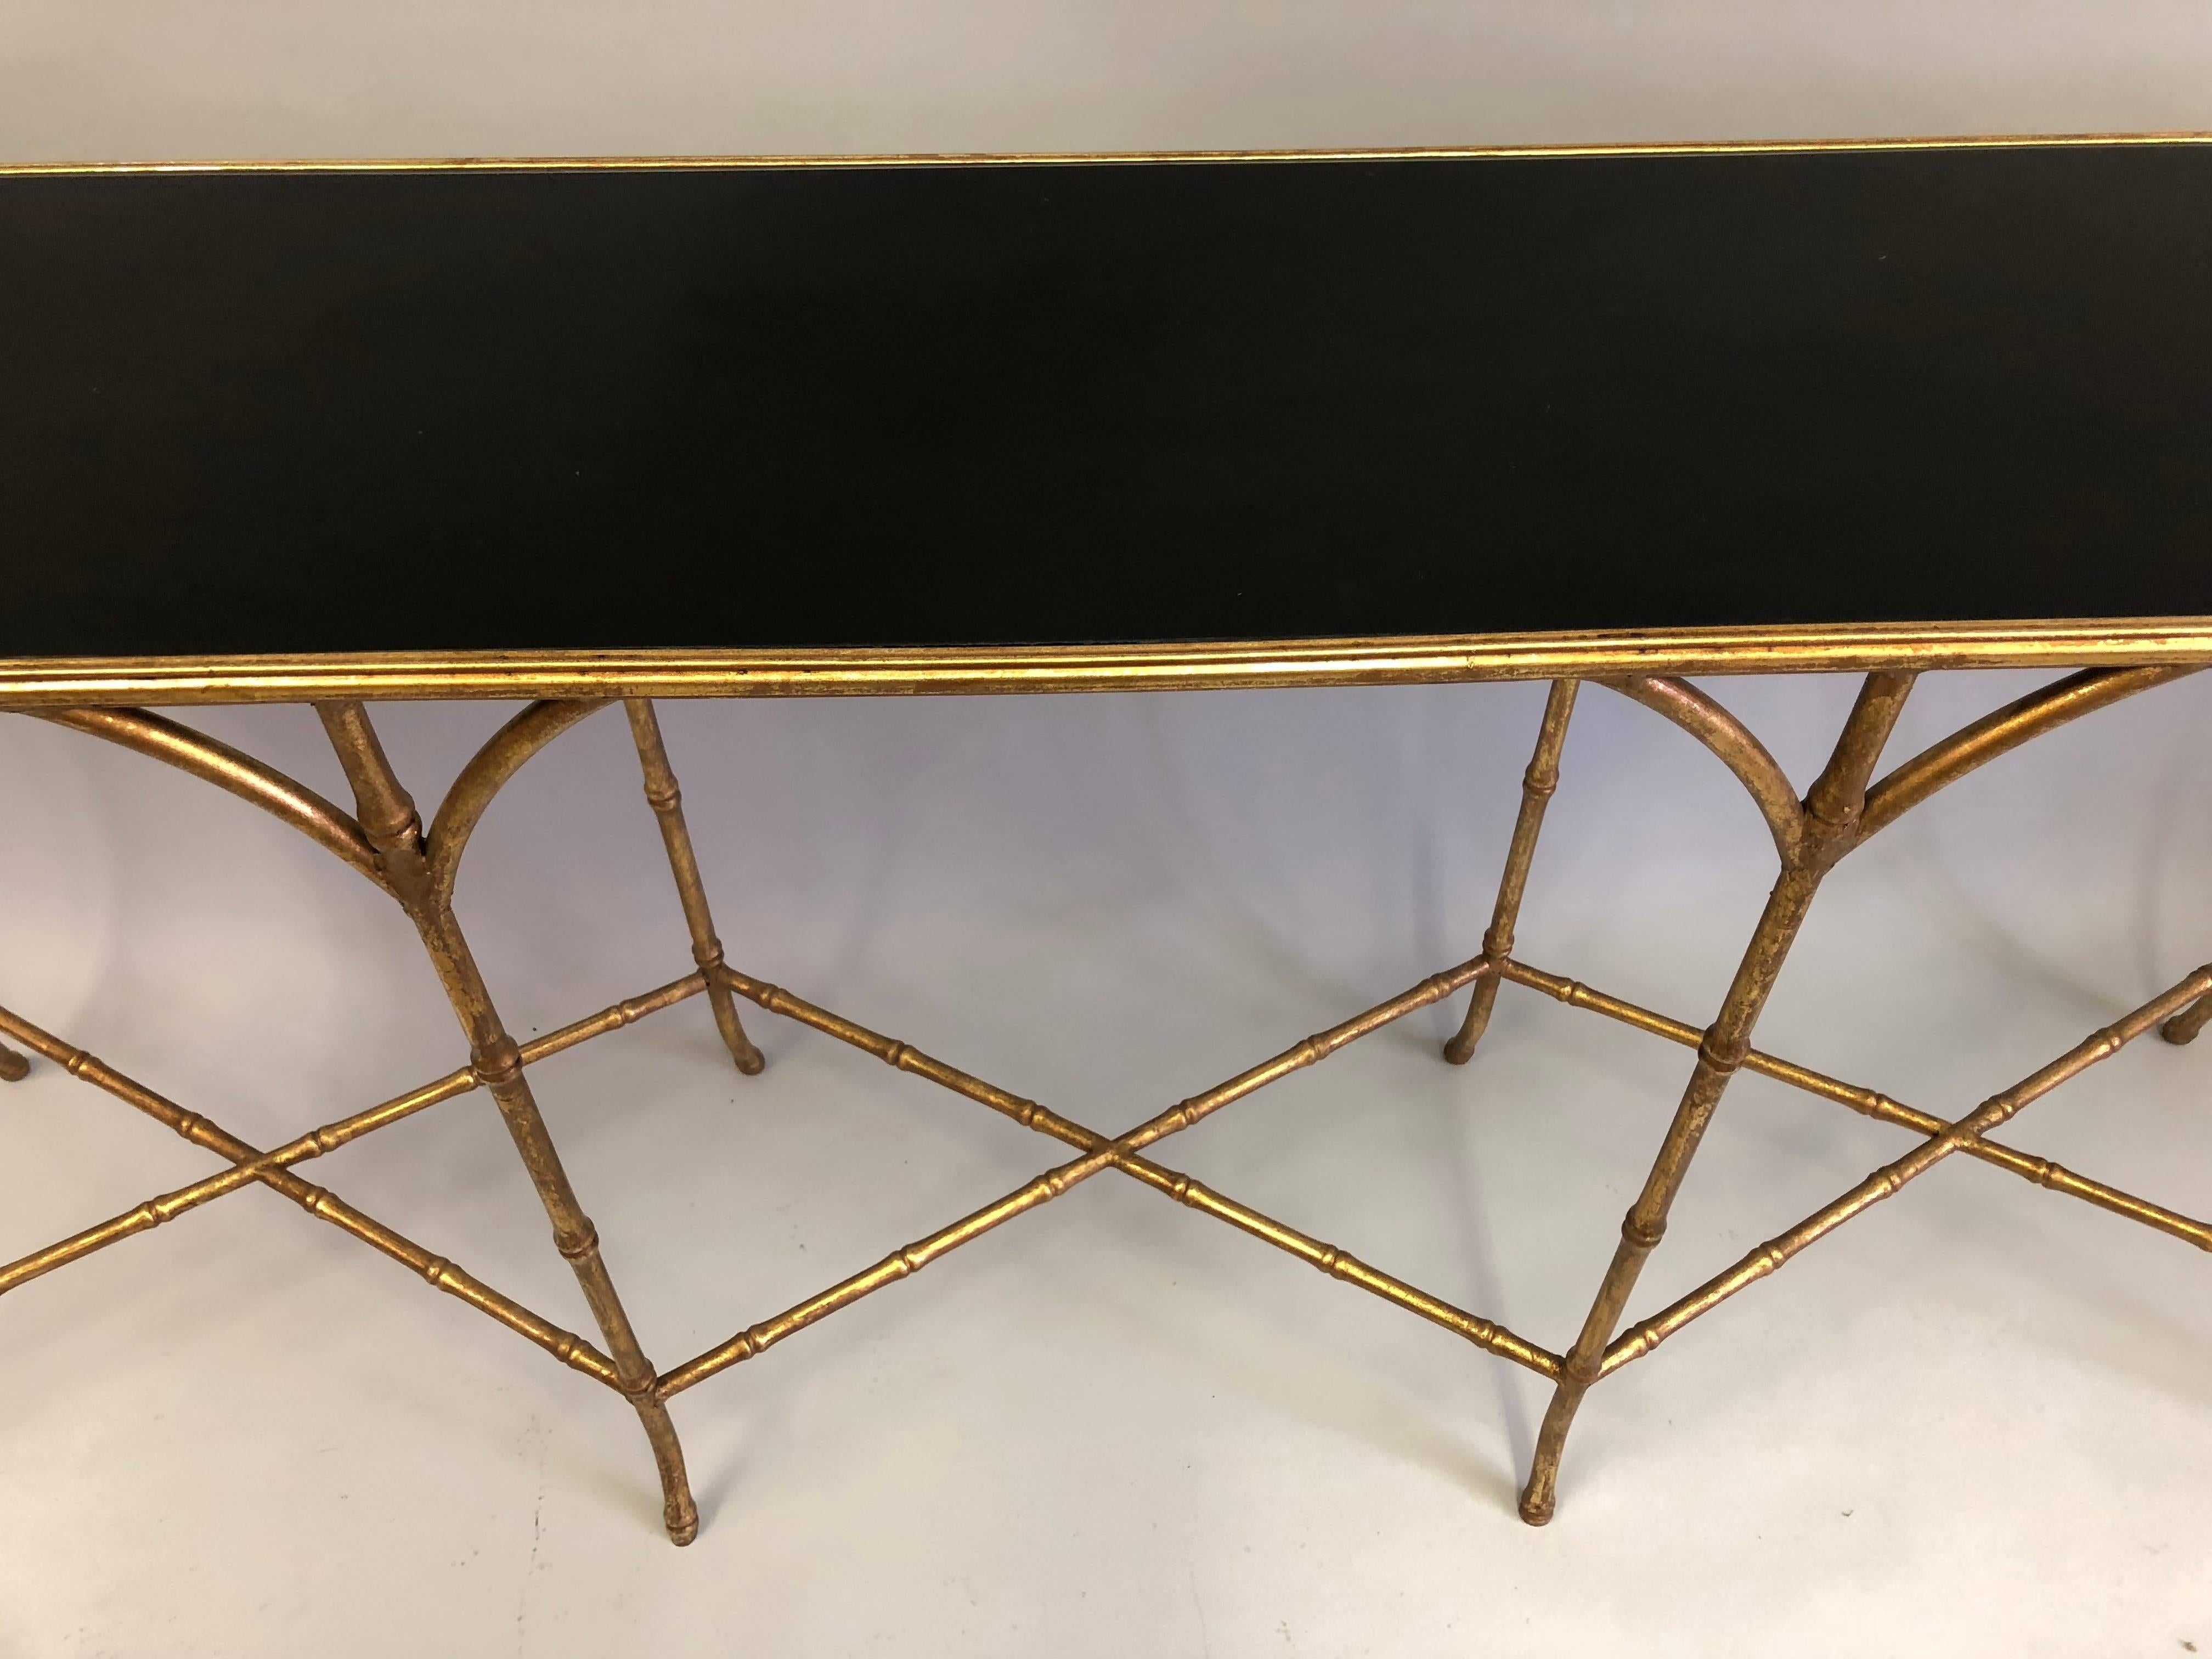 20th Century Large French Mid-Century Modern Gilt Iron Faux Bamboo Console, Maison Bagues